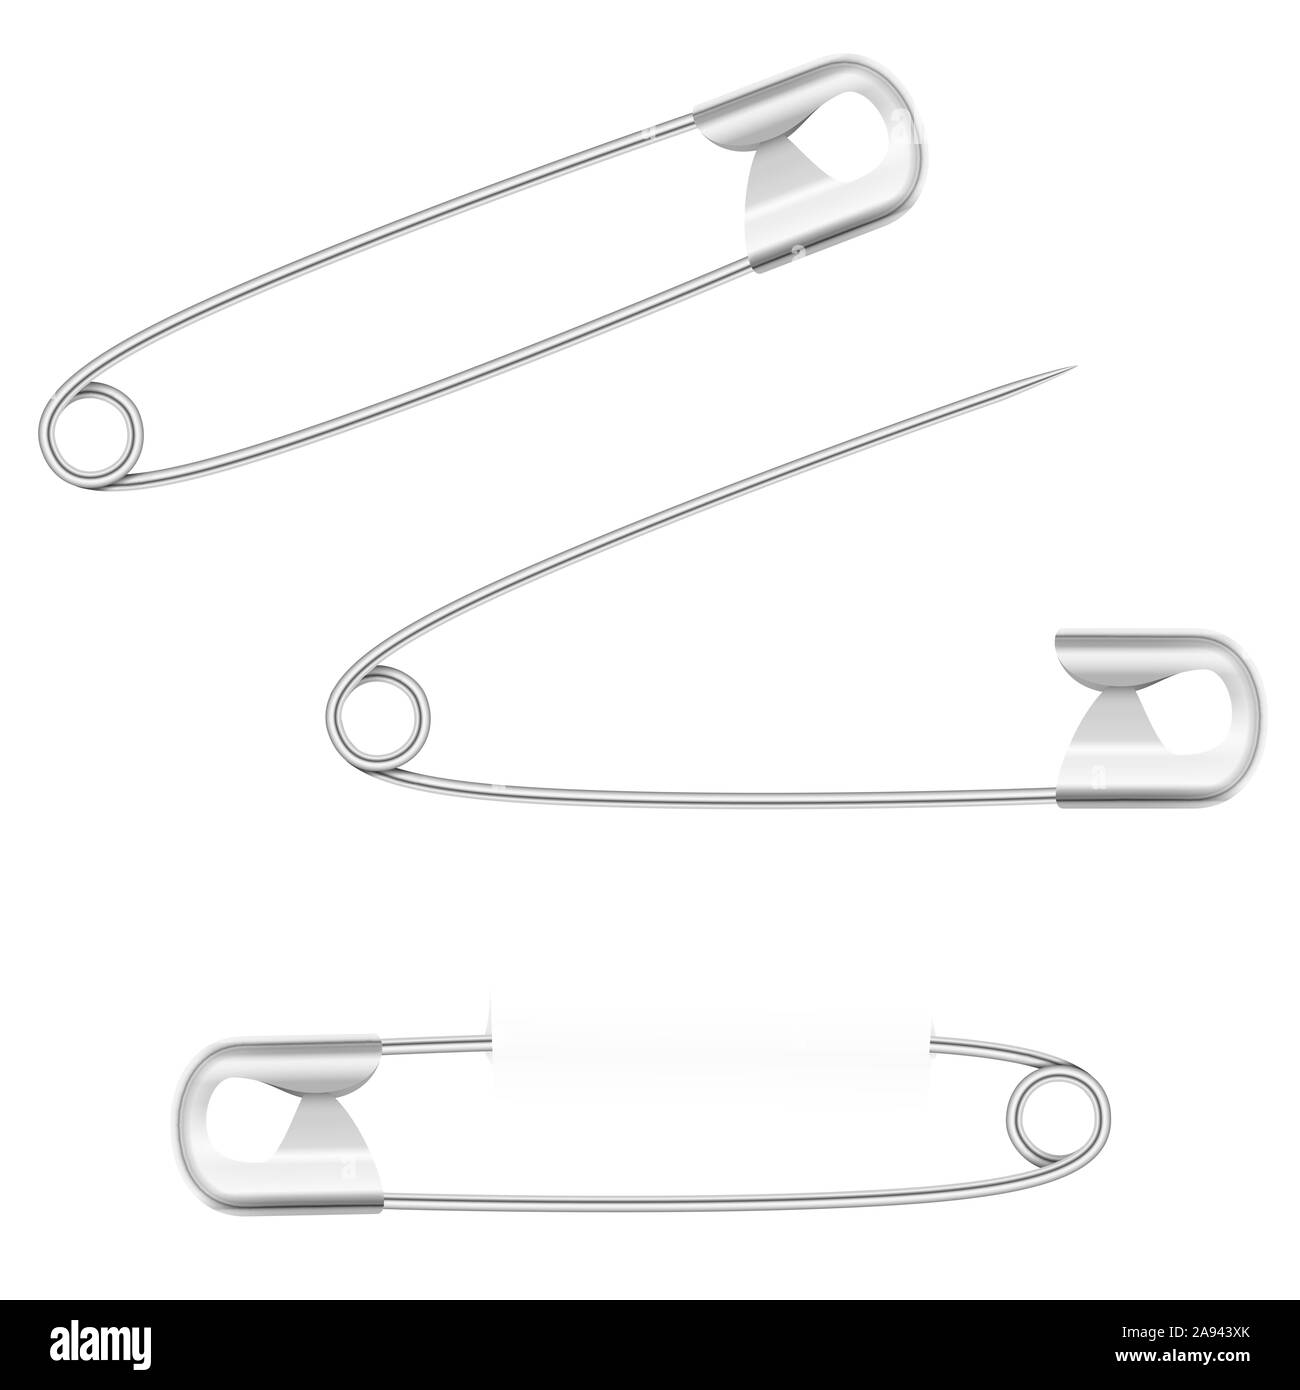 Safety pins, open, closed and pierced. Silver metallic household equipment - illustration on white background. Stock Photo